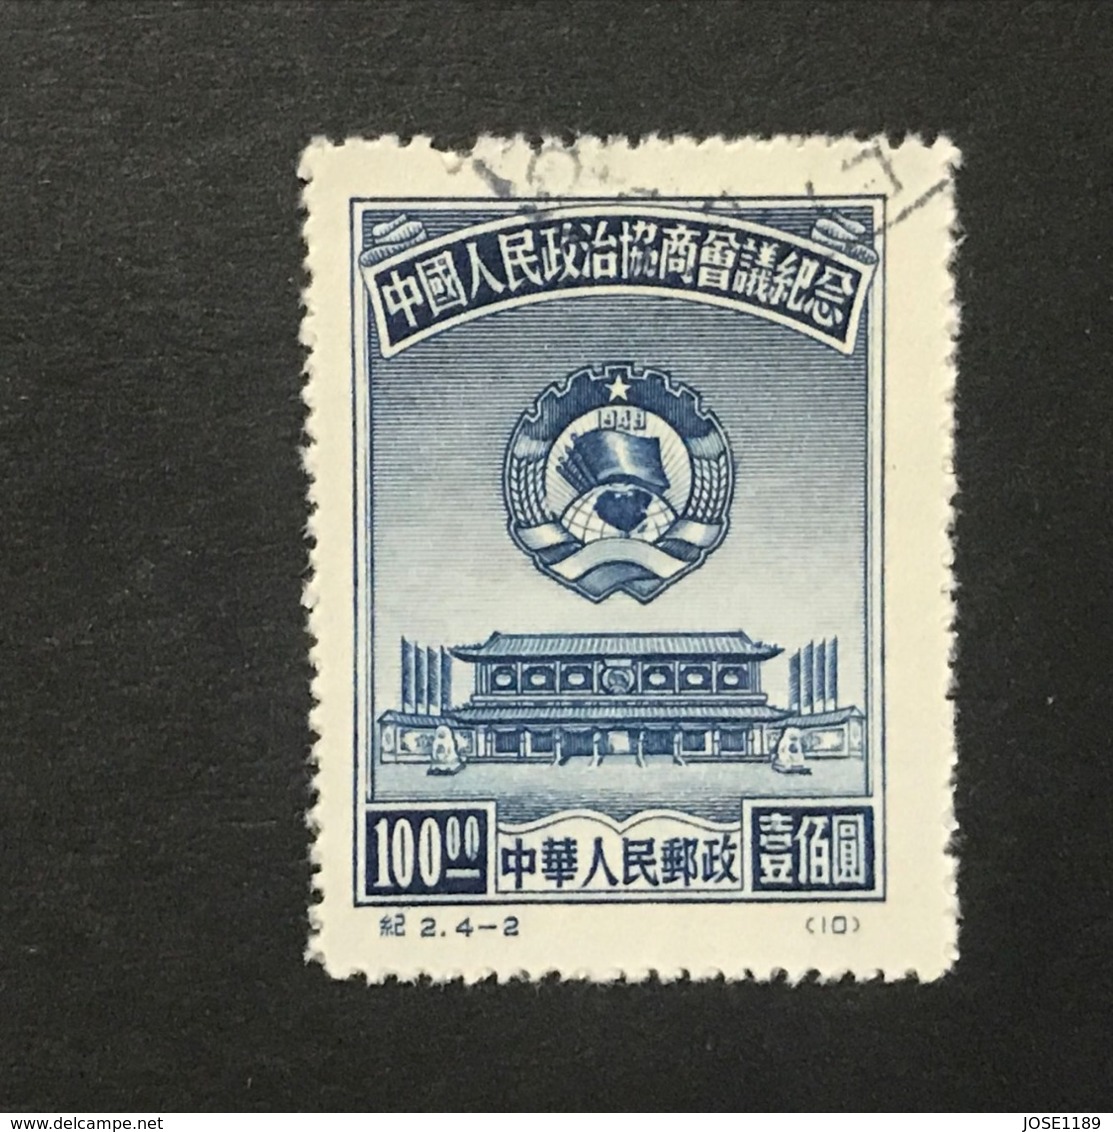 ◆◆◆ CHINA 1950 Chinese People’s Consultative Political Conference   $100 (4-2)   USED  AA4388 - Usados